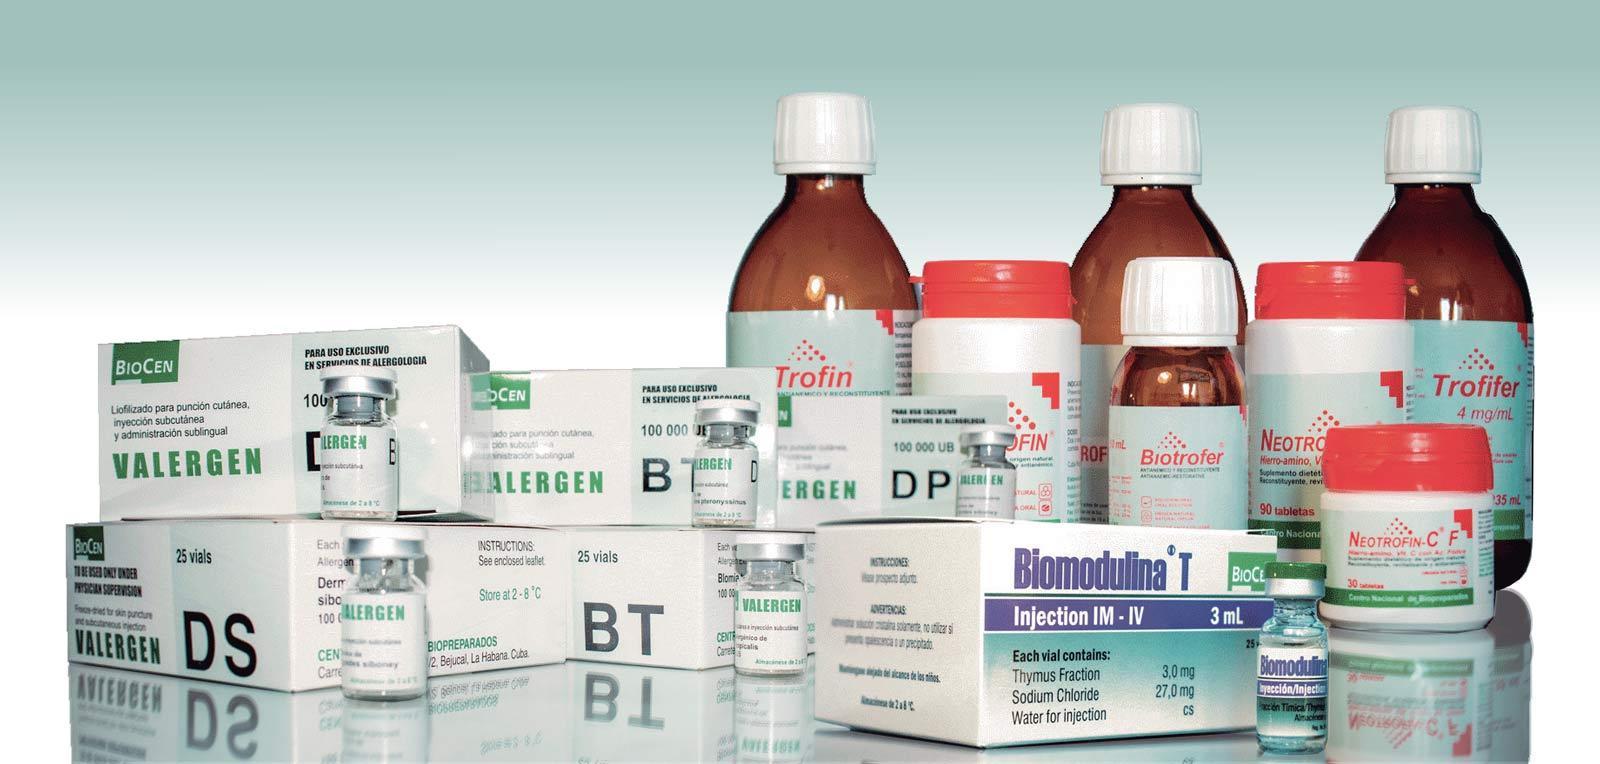 BioCen, born to succeed in biopharmaceutical sciences